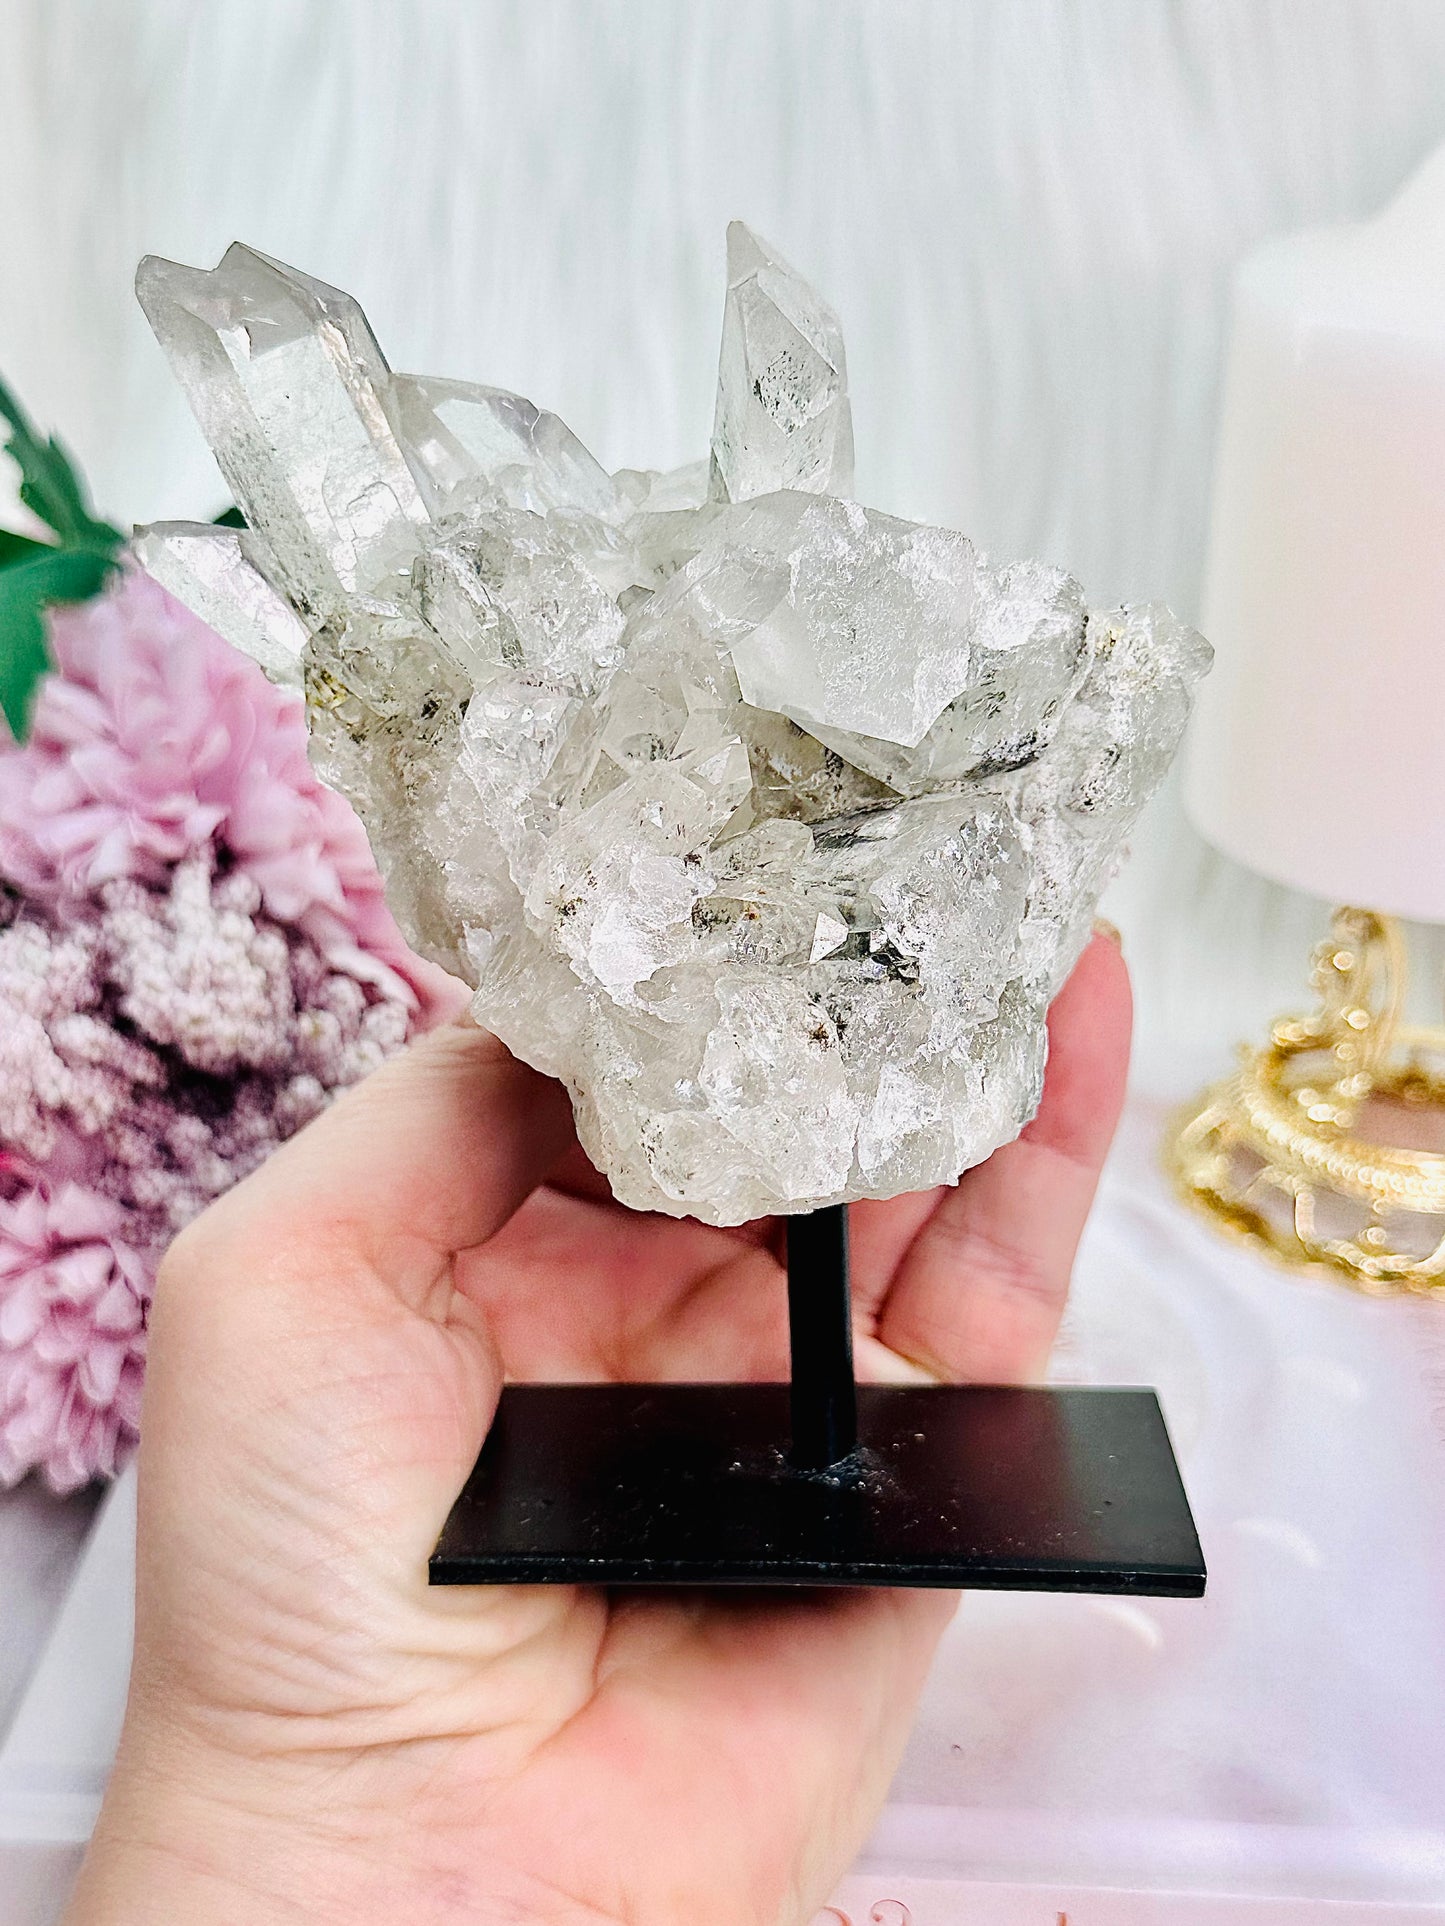 Simply Stunning Large 533gram Natural Clear Quartz Cluster with Phantom Inclusions From Brazil